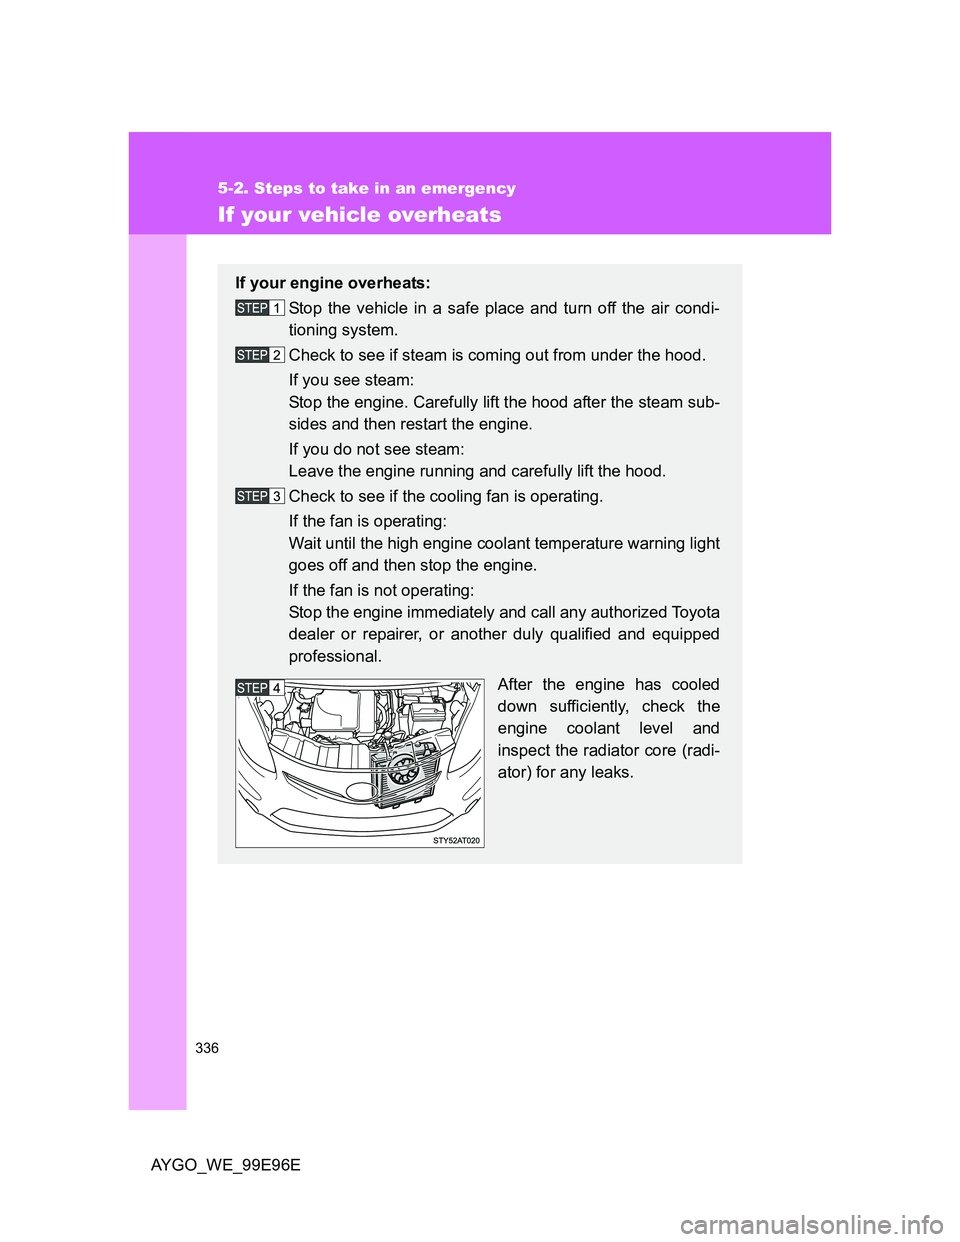 TOYOTA AYGO 2012  Owners Manual (in English) 336
5-2. Steps to take in an emergency
AYGO_WE_99E96E
If your vehicle overheats
If your engine overheats:
Stop the vehicle in a safe place and turn off the air condi-
tioning system.
Check to see if s